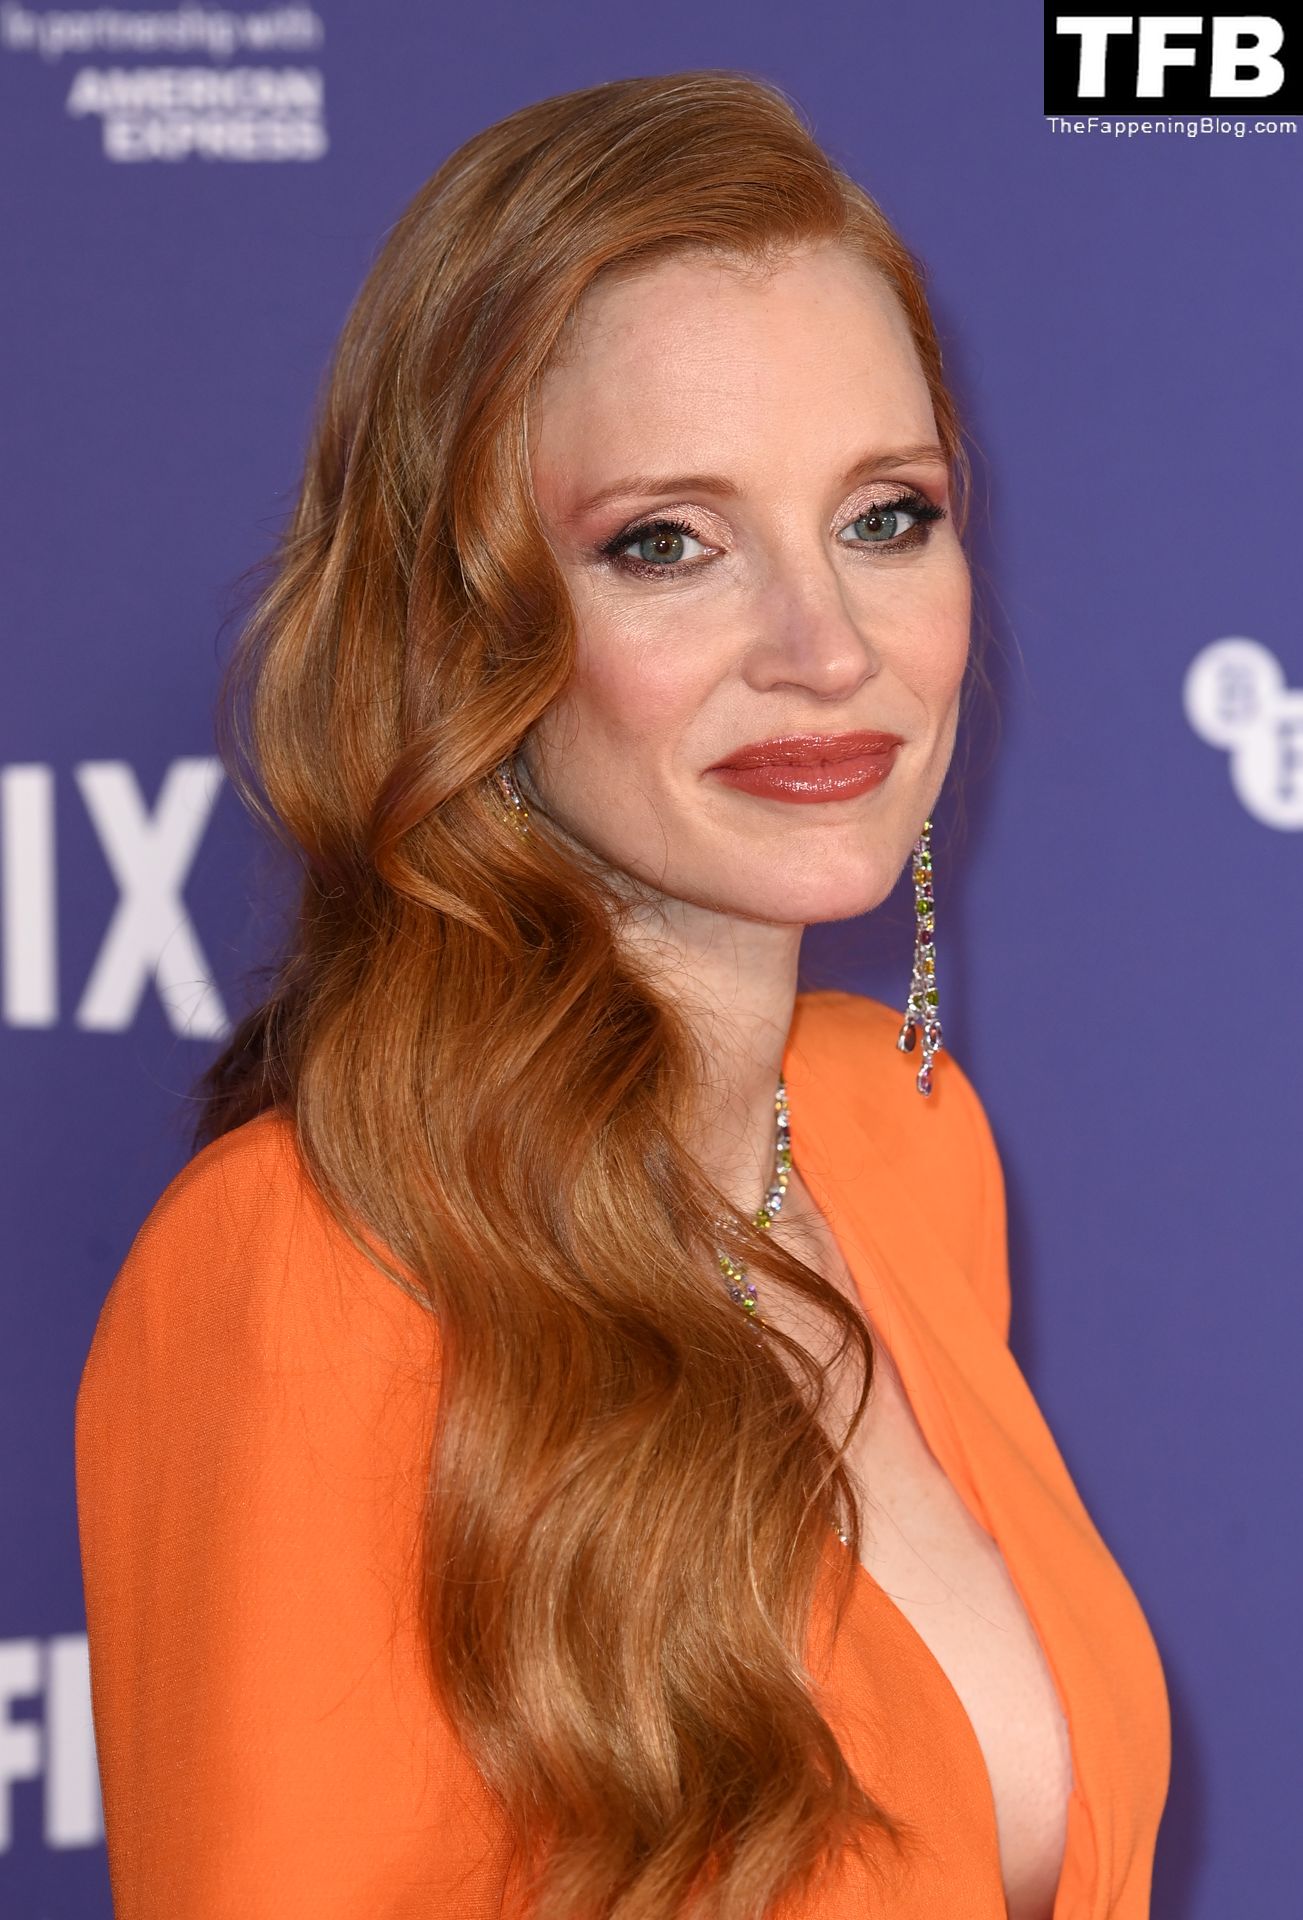 Jessica-Chastain-Sexy-The-Fappening-Blog-18.jpg